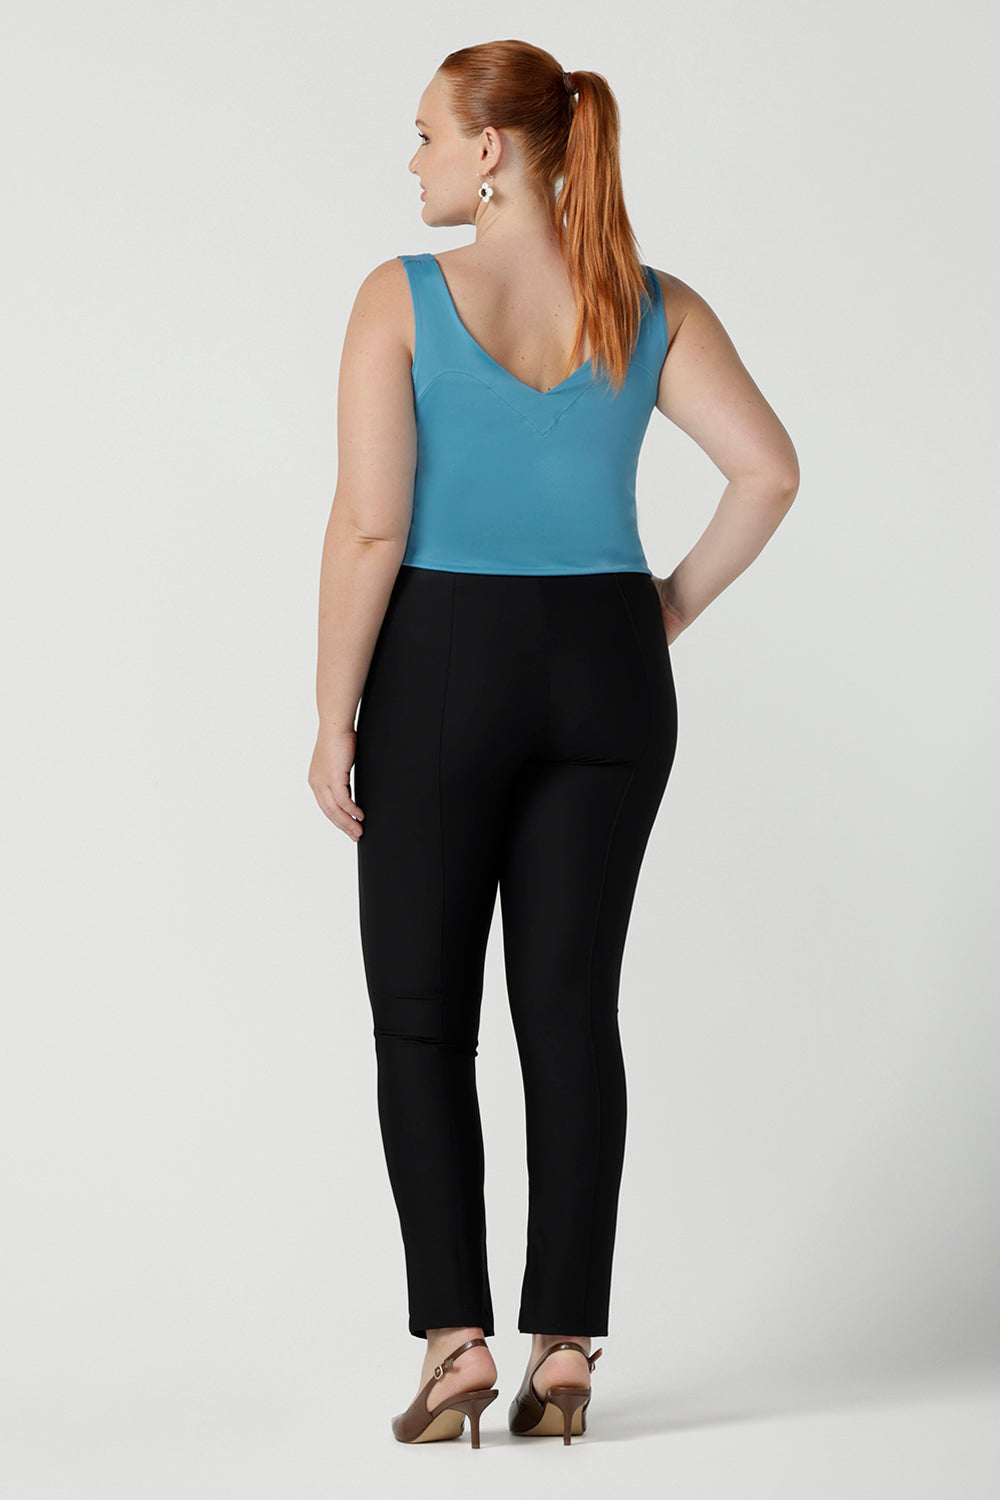 Back view of a size 12 a slim leg pant, black pants by Australian and New Zealand women's clothing brand, L&F. These comfortable work pants are worn with a Eddy cami in Mineral. Made in Australia for women size 8 - 24.